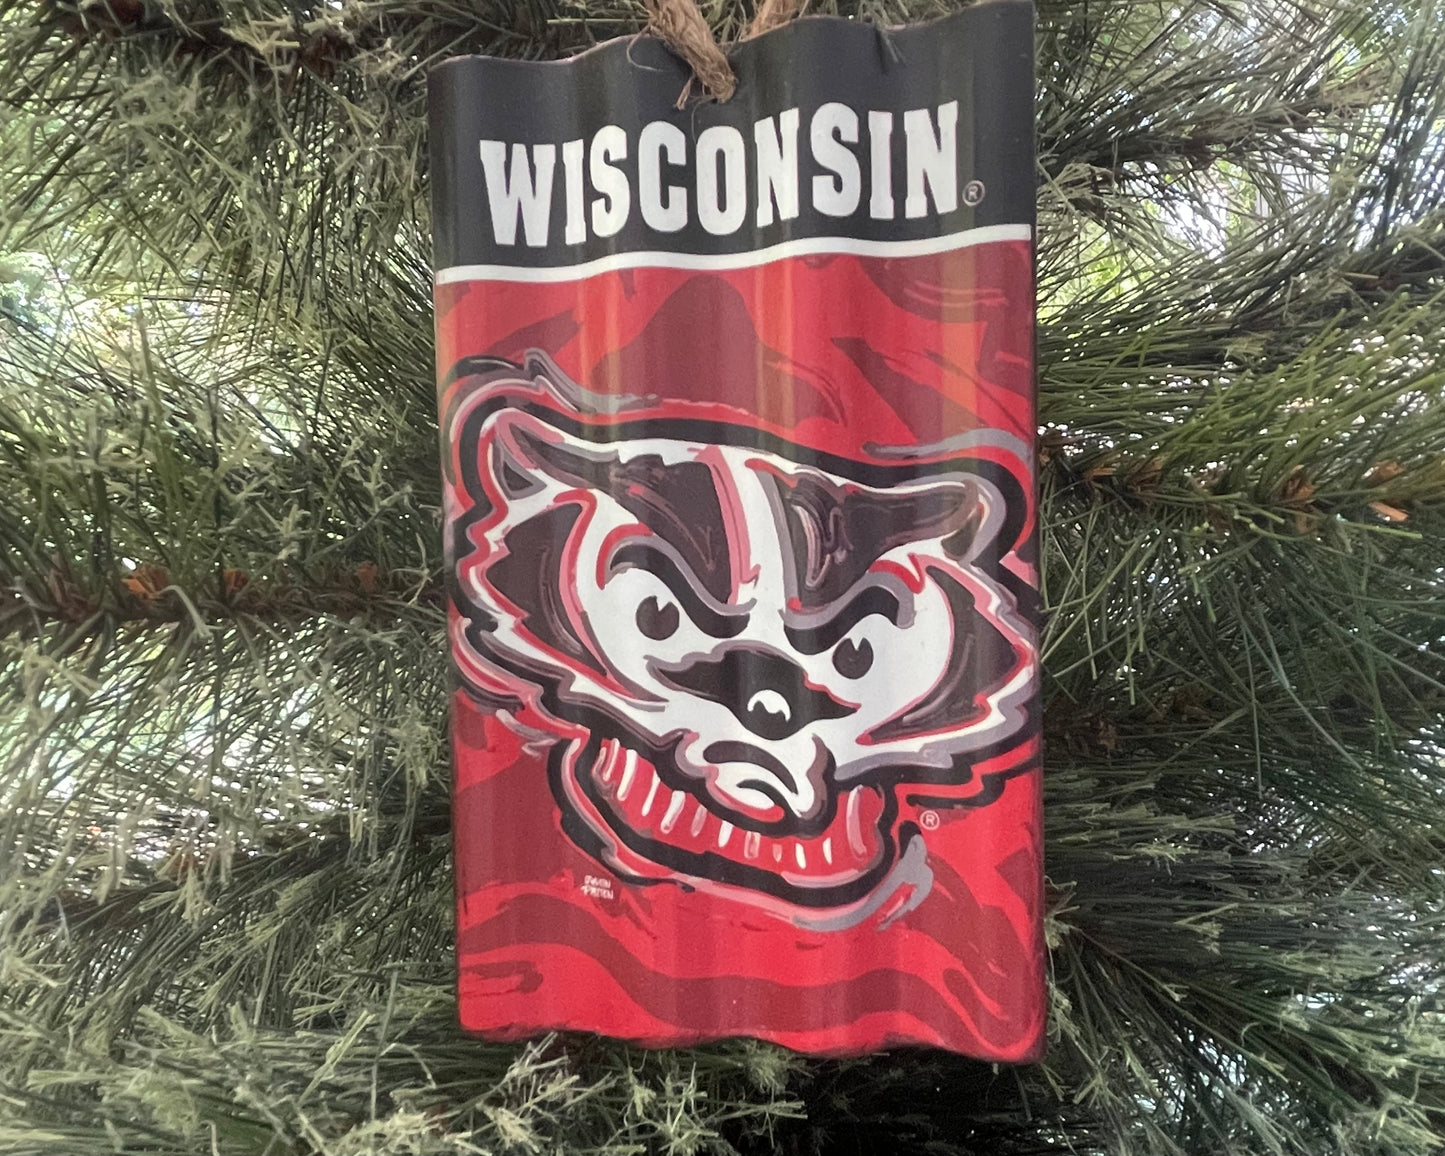 University of Wisconsin Metal Ornament by Justin Patten